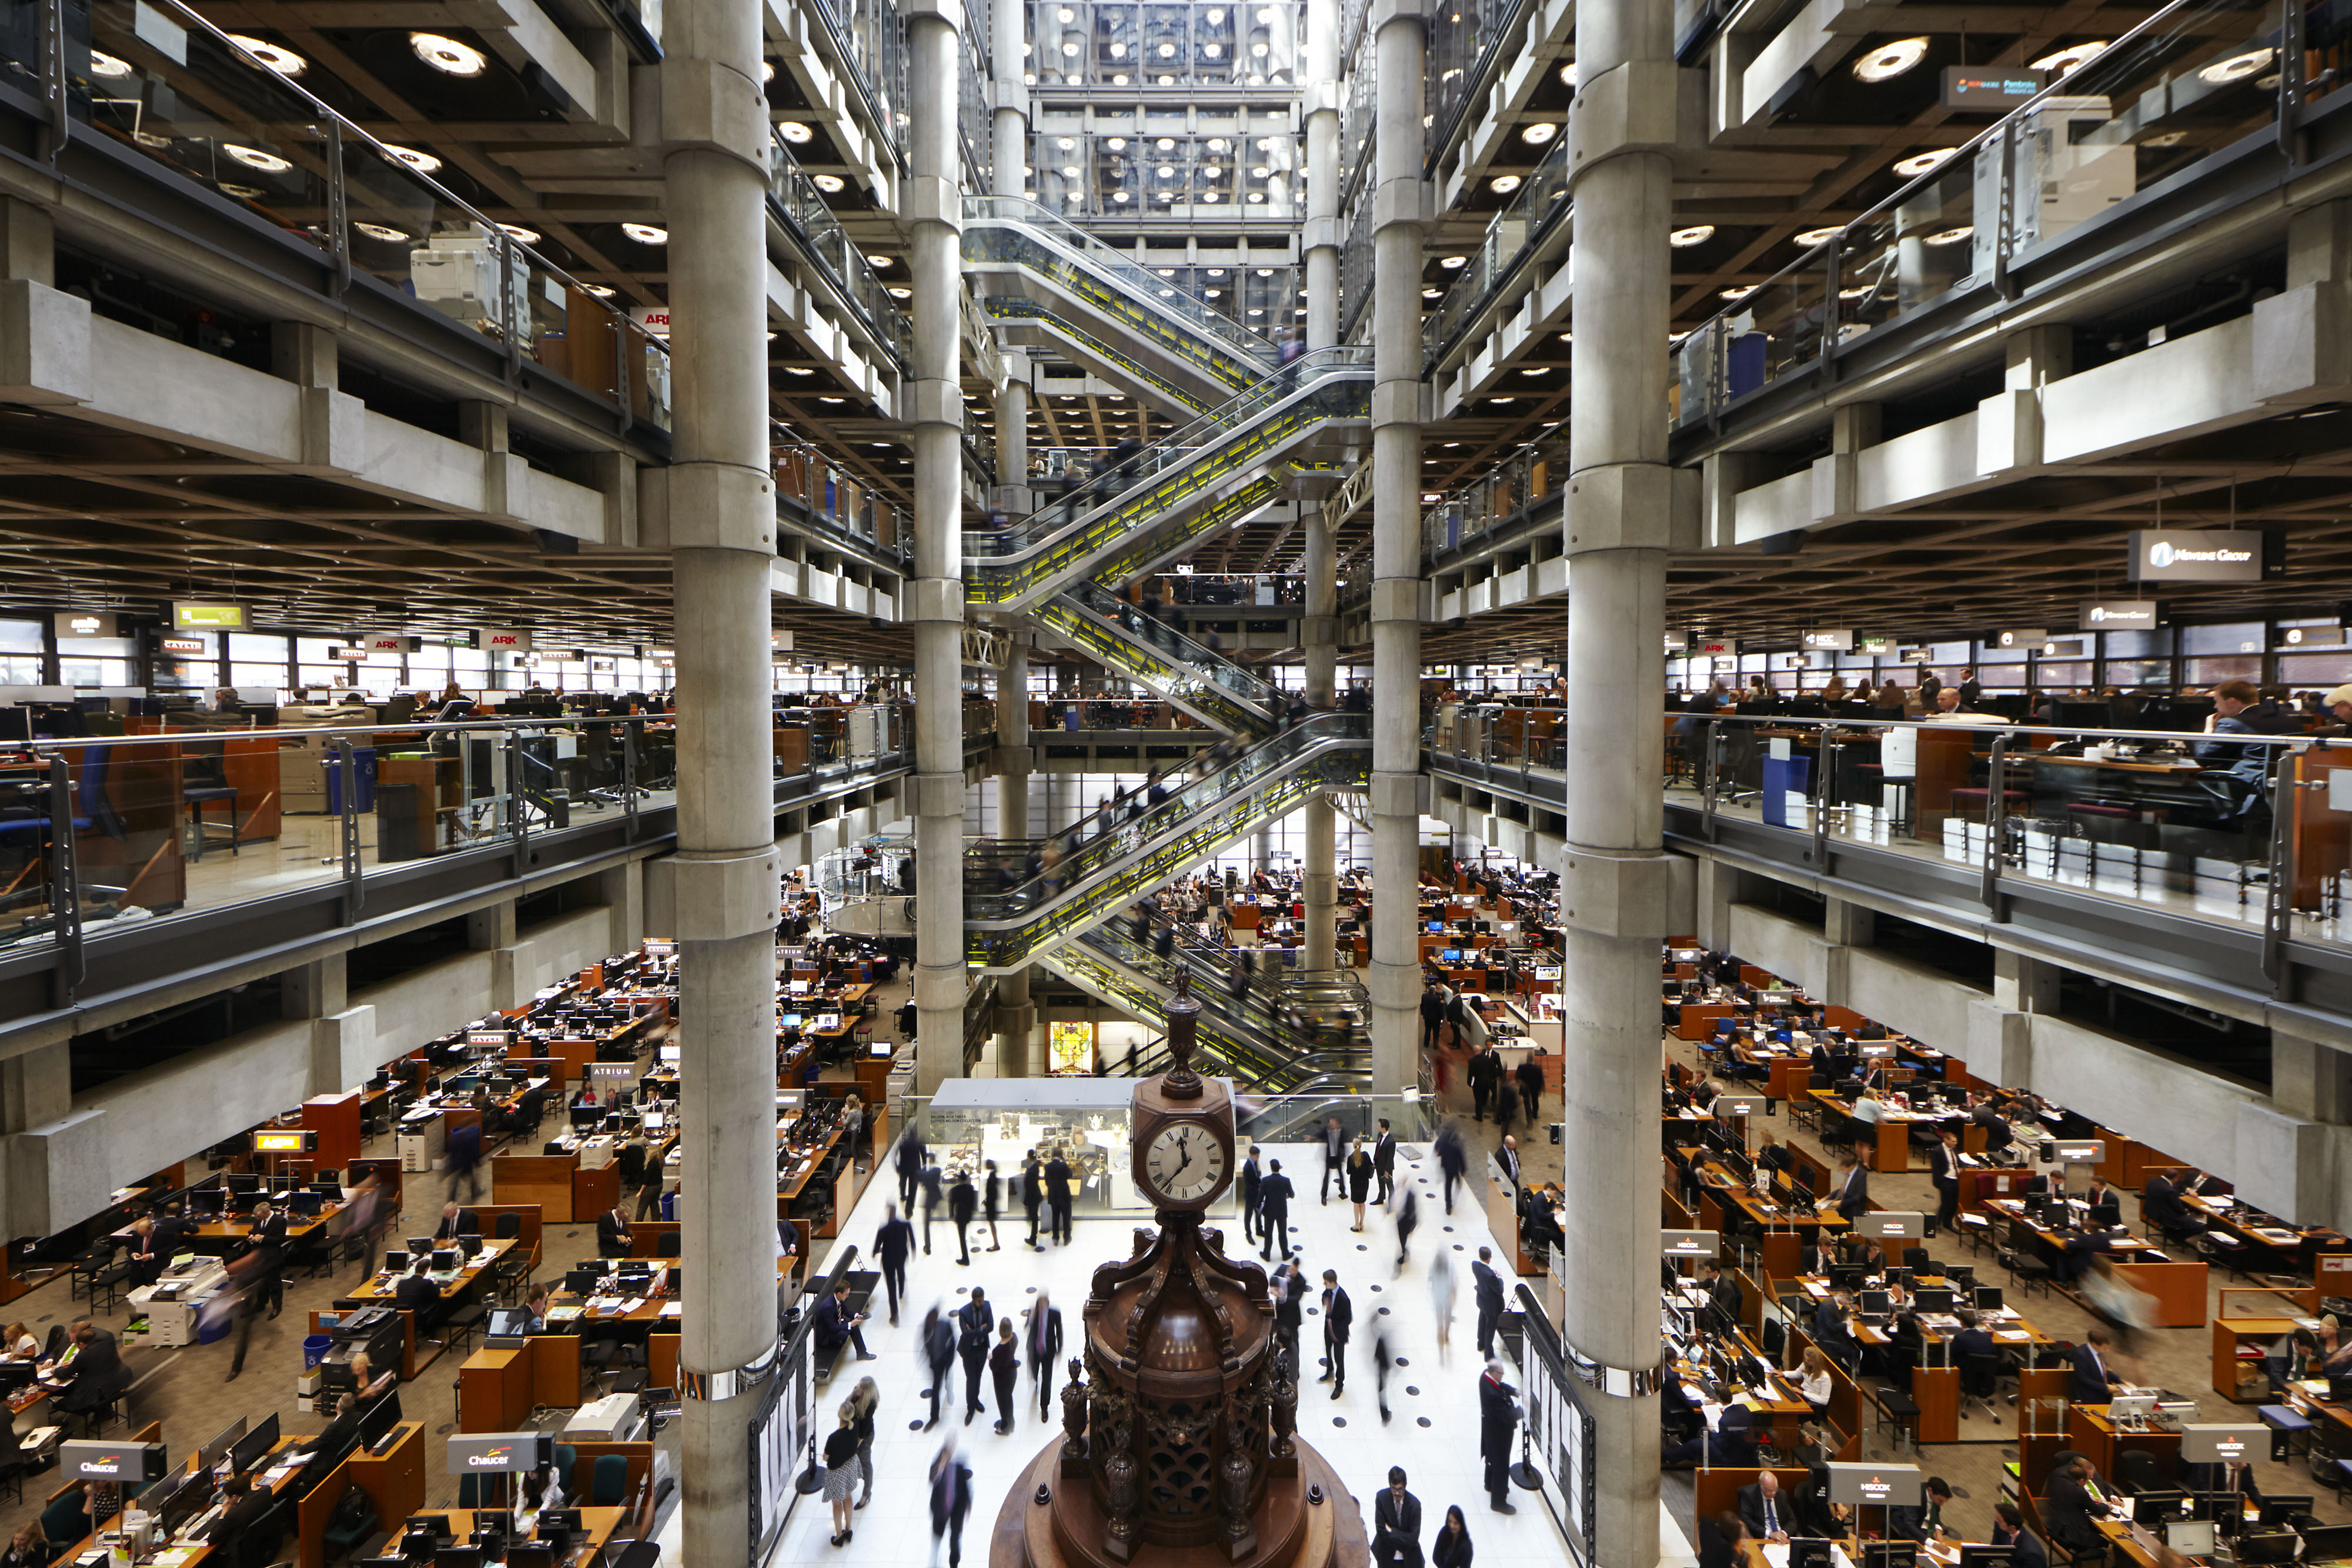 The Underwriting Room in the Lloyd's building